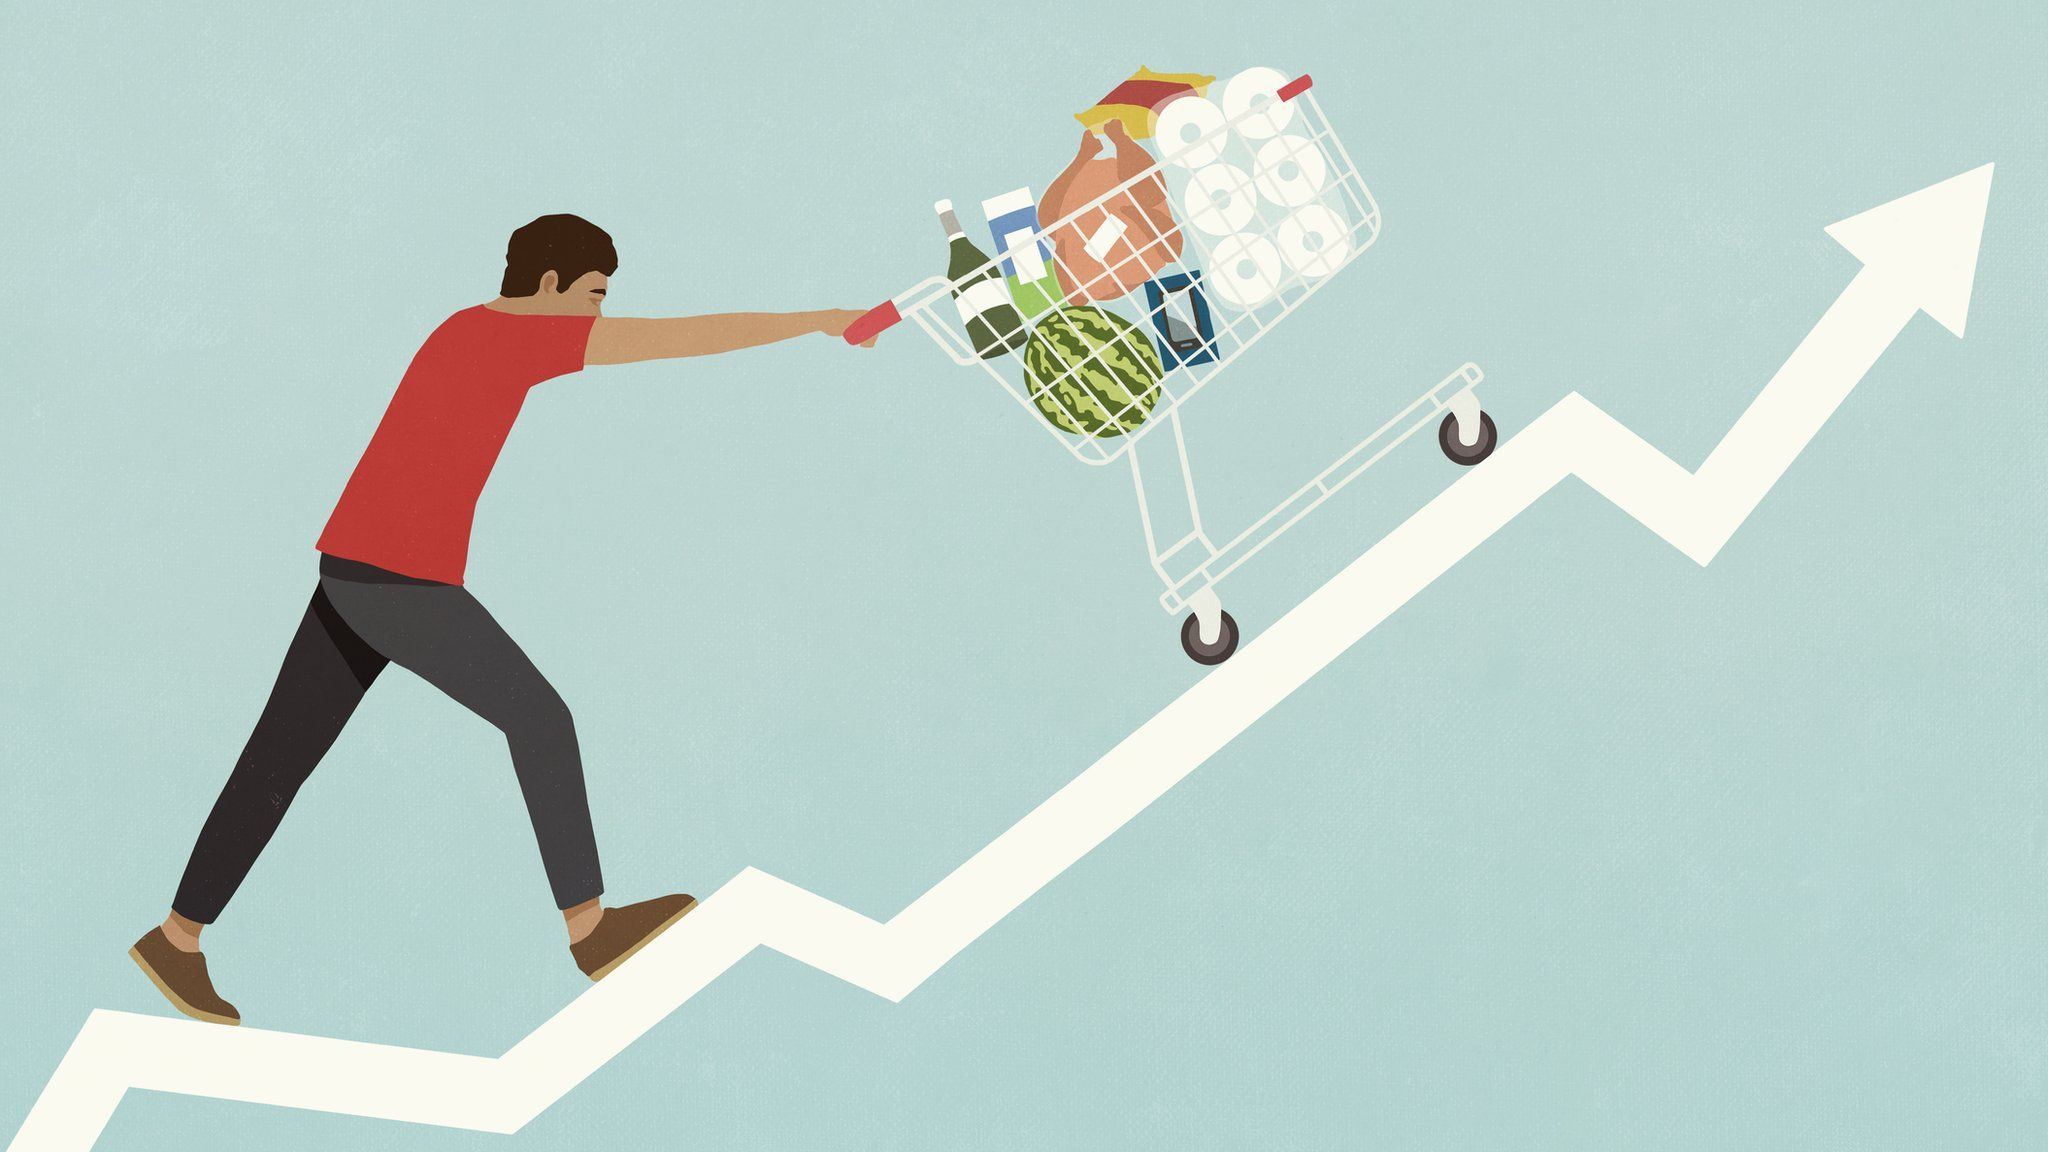 illustration shows shopper struggling as they push trolley filled with items up an arrow